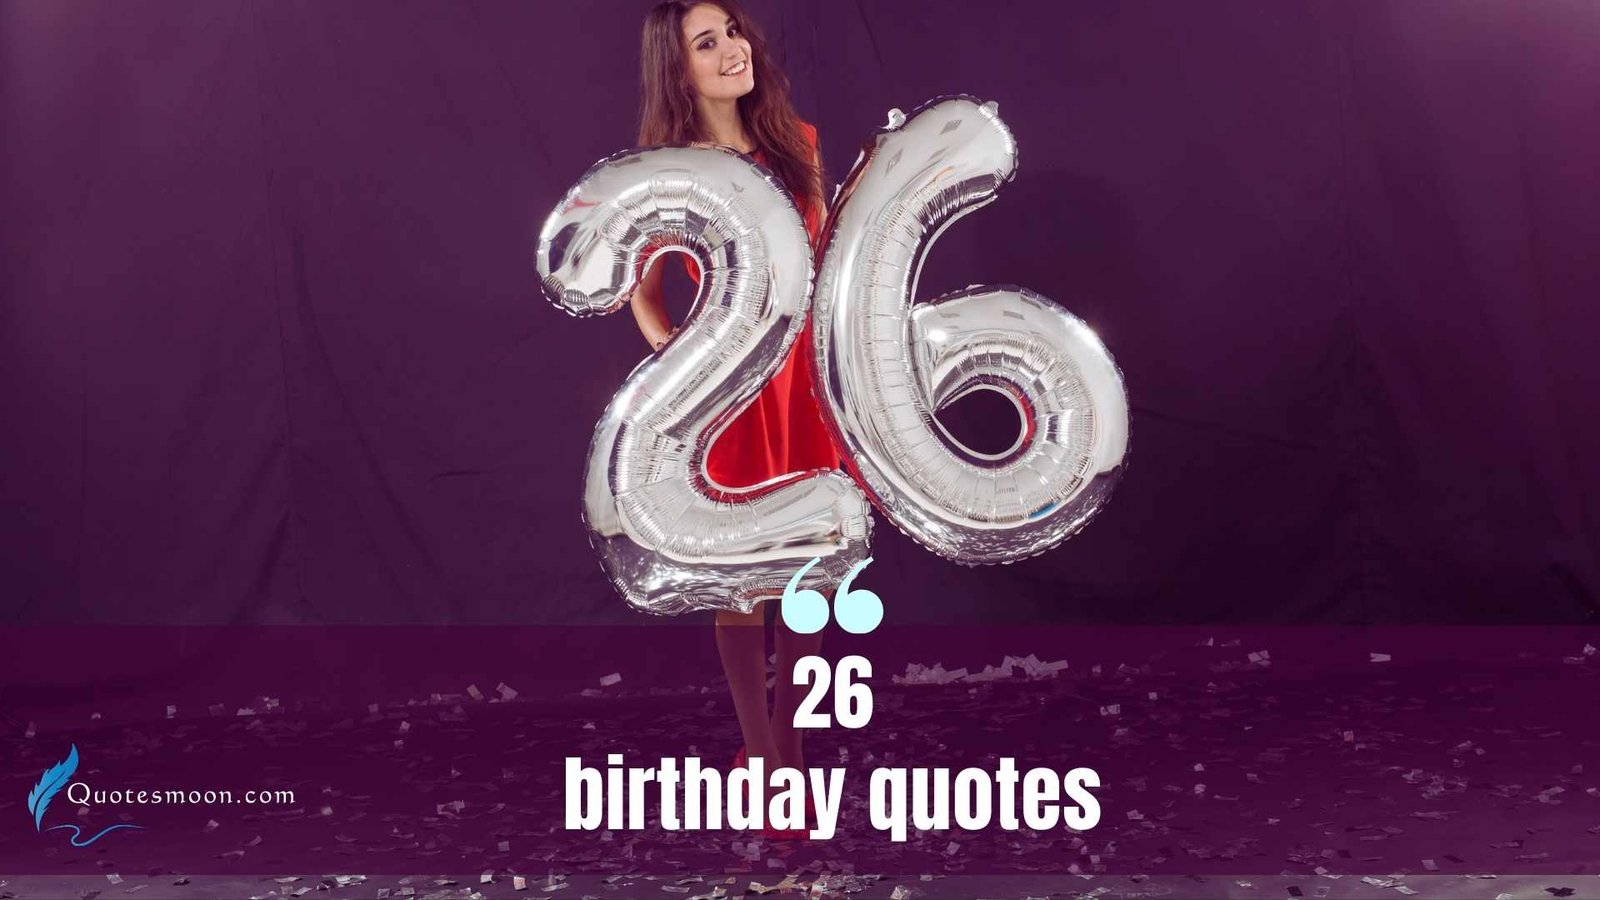 26 birthday quotes images